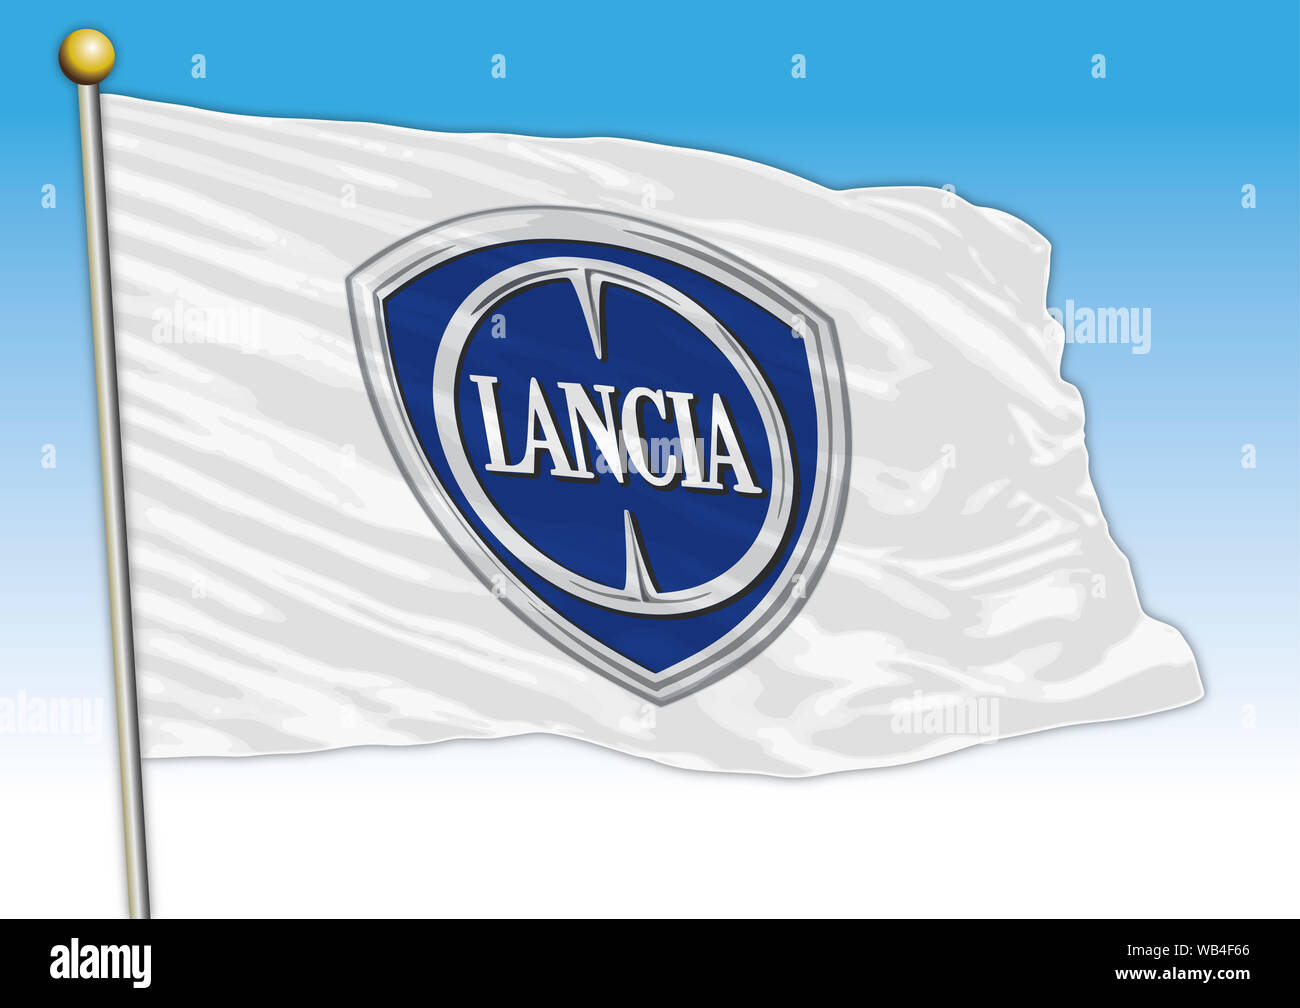 Lancia car industrial group, flag with logo, illustration Stock Photo